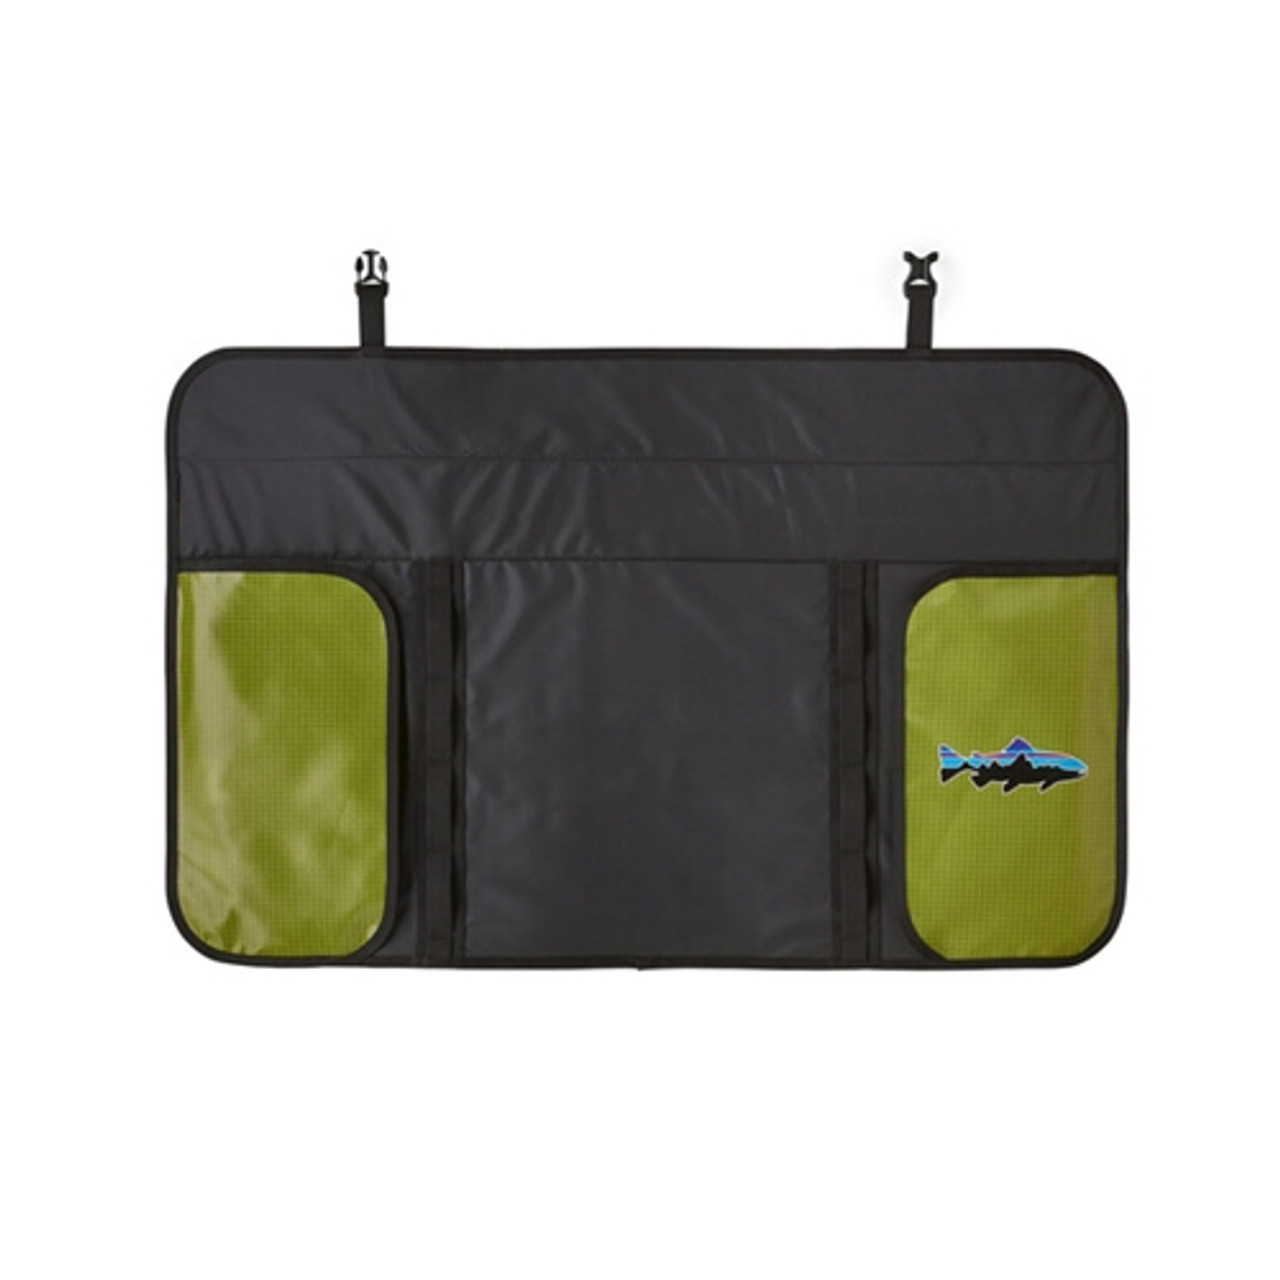 Patagonia Travel Rod Roll Case